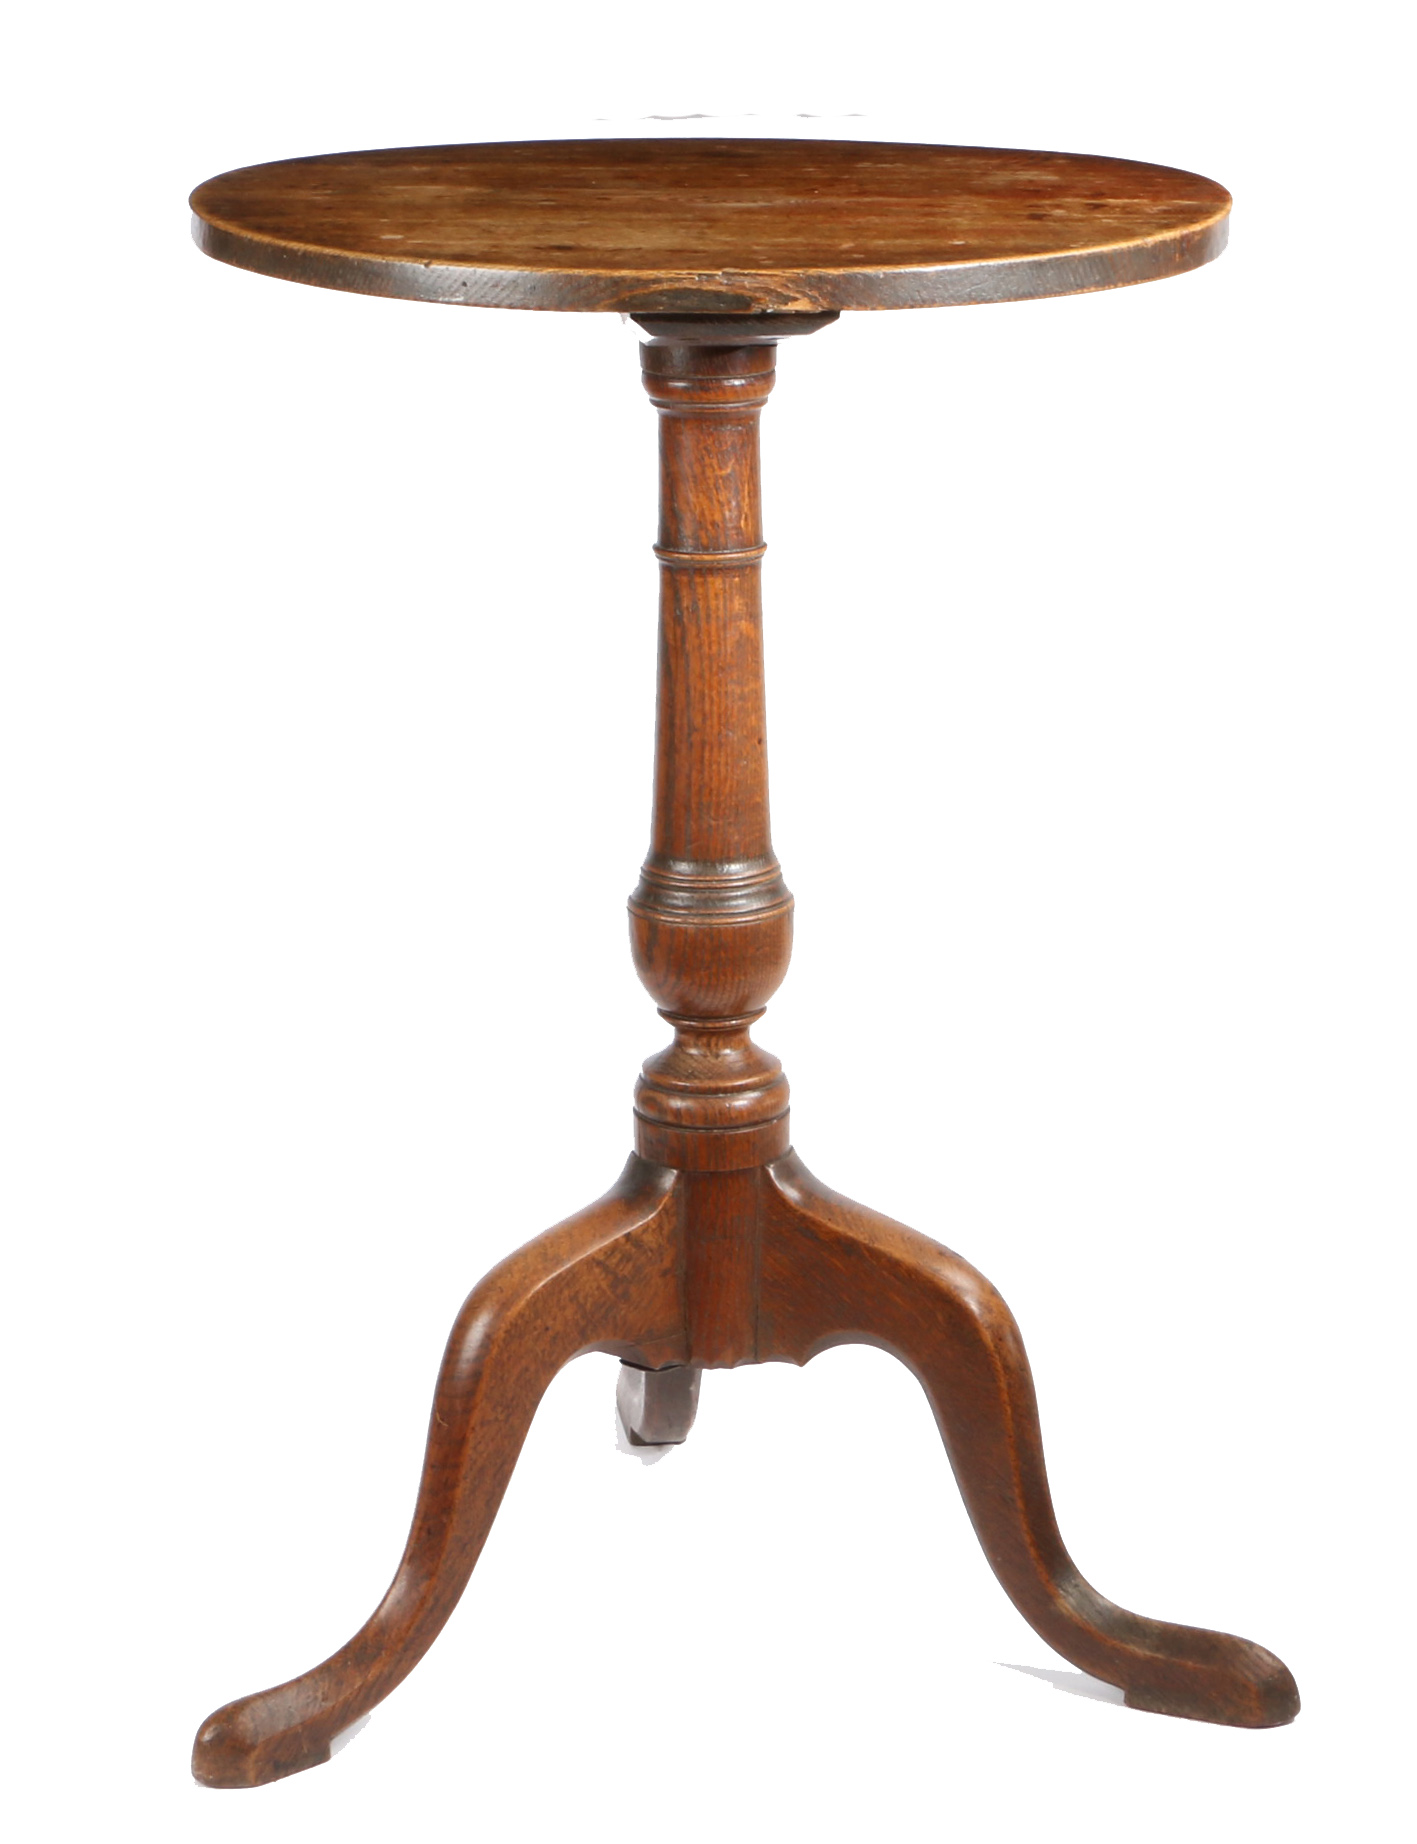 A George III ash and oak tripod table, circa 1780 Having a fixed, one-piece, circular ash top, on - Image 2 of 2